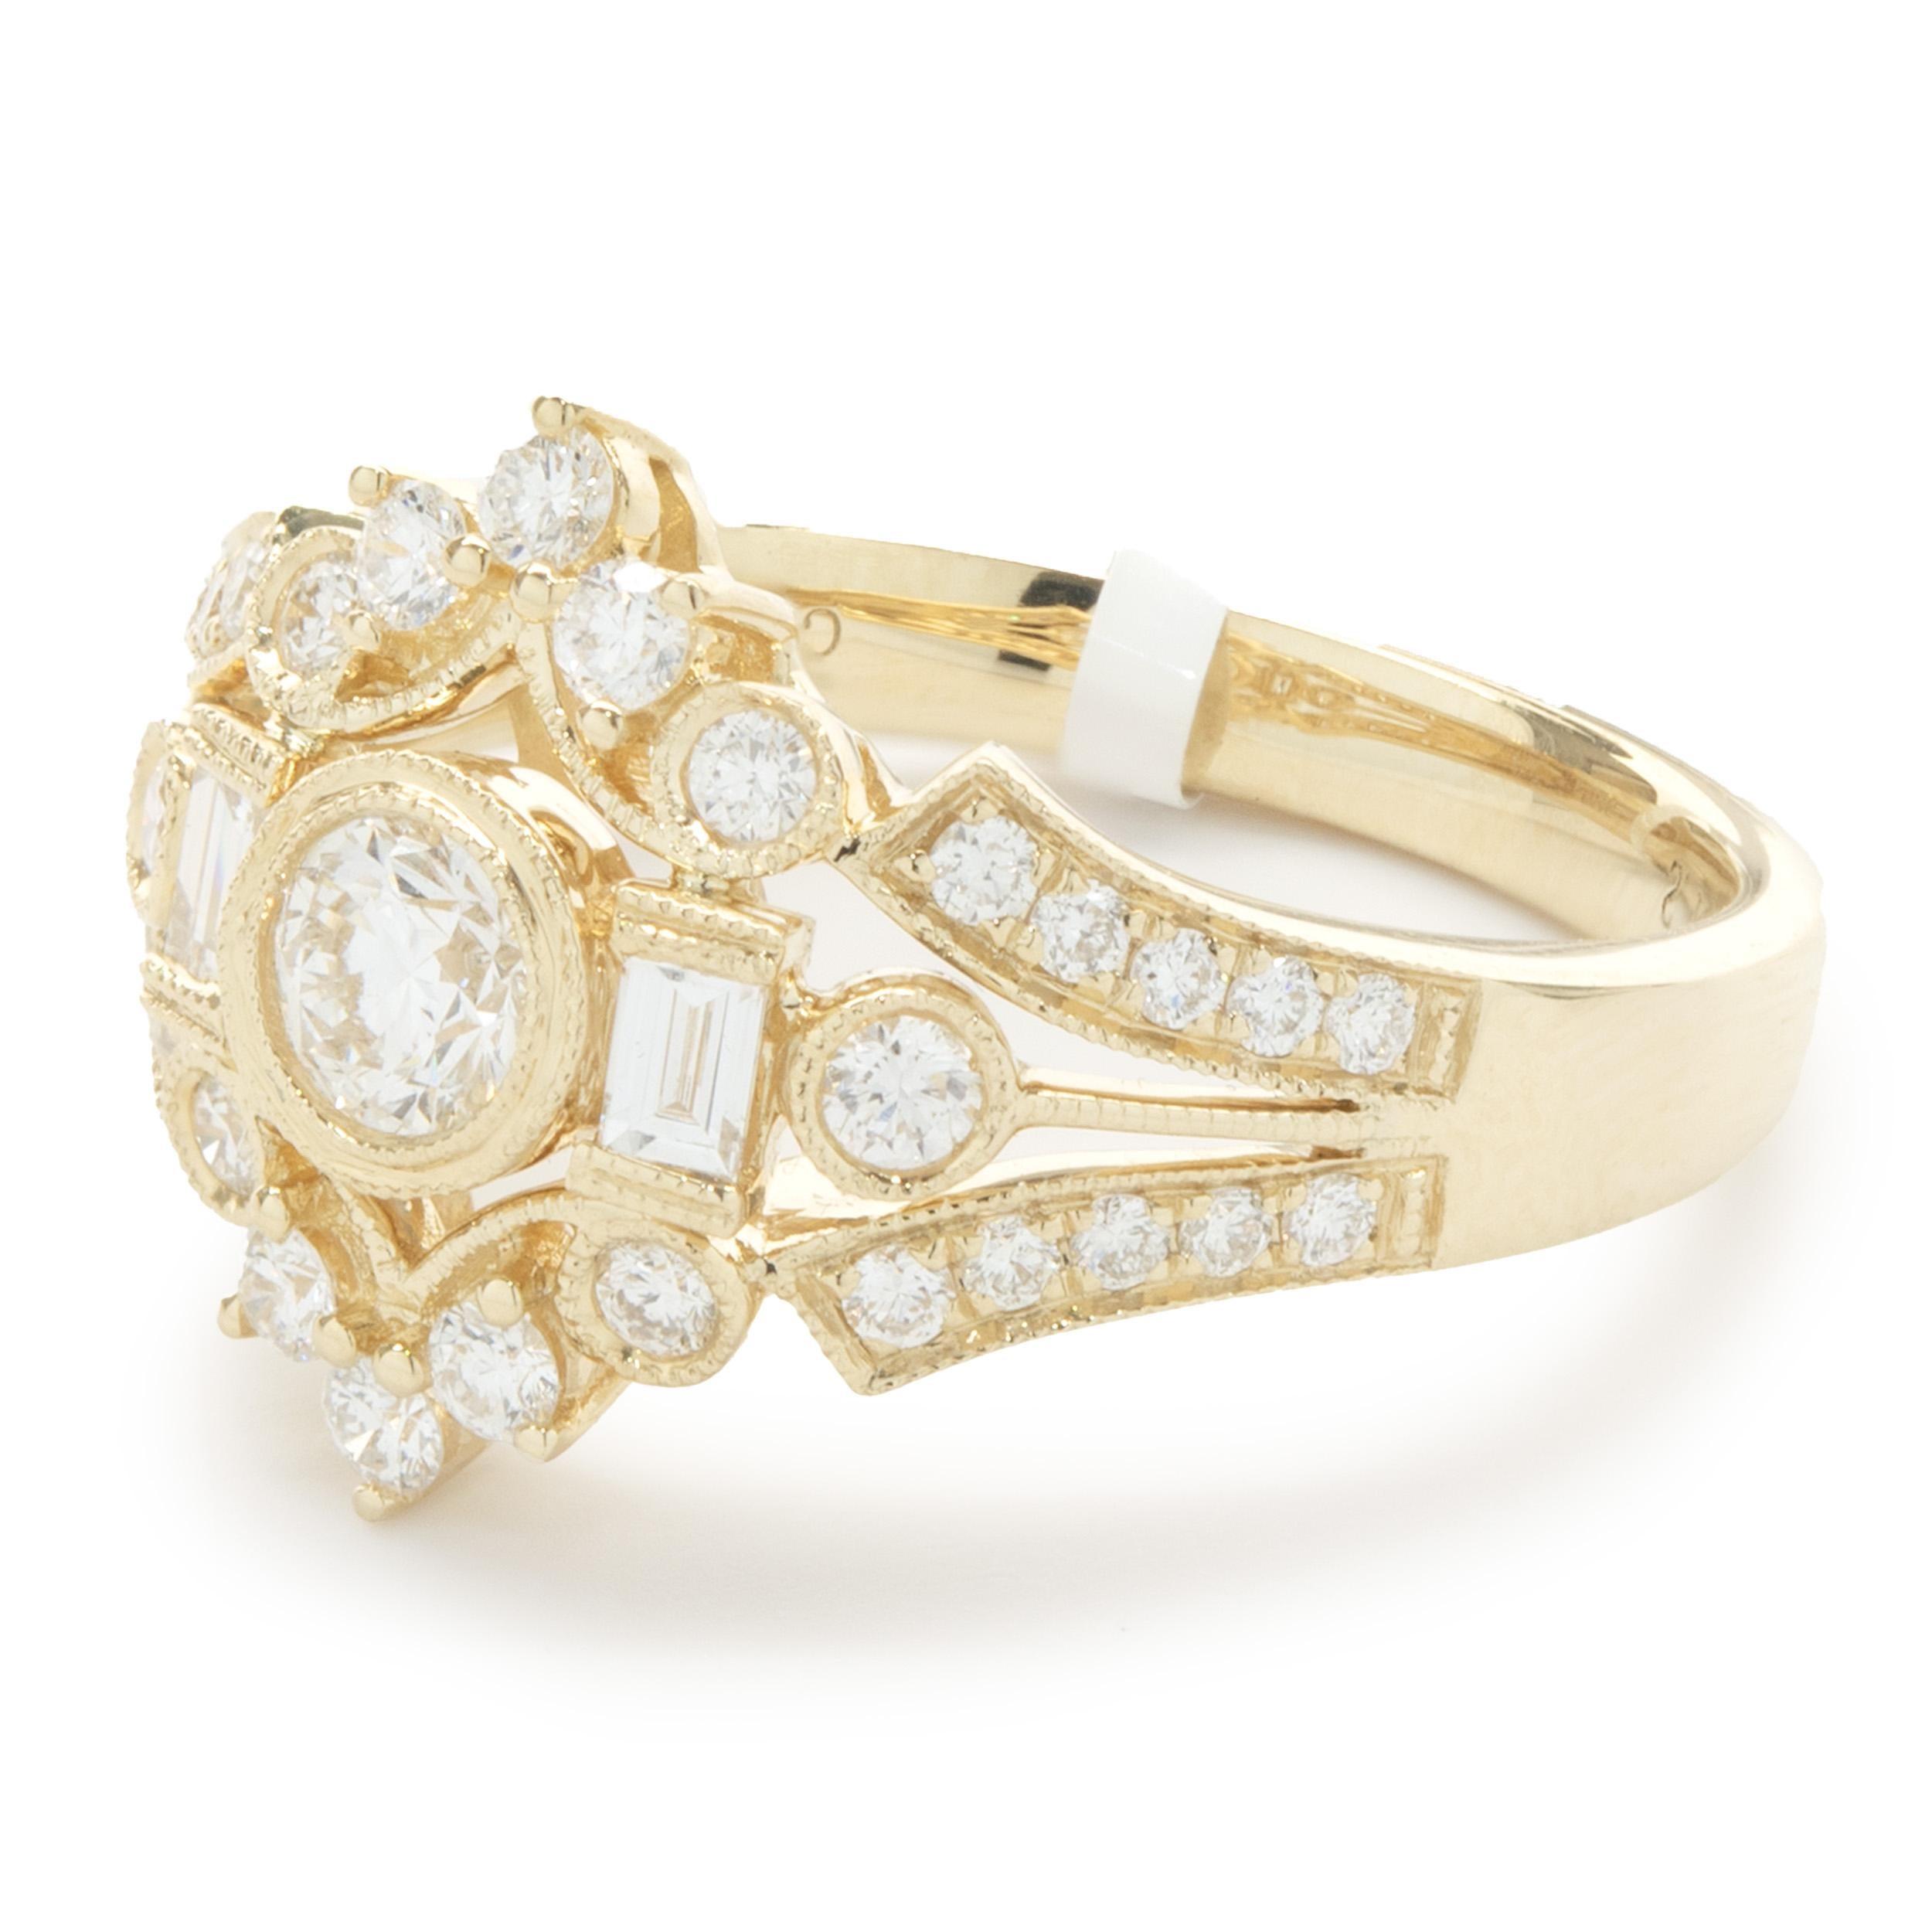 14 Karat Yellow Gold Deco Style Diamond Ring In Excellent Condition For Sale In Scottsdale, AZ